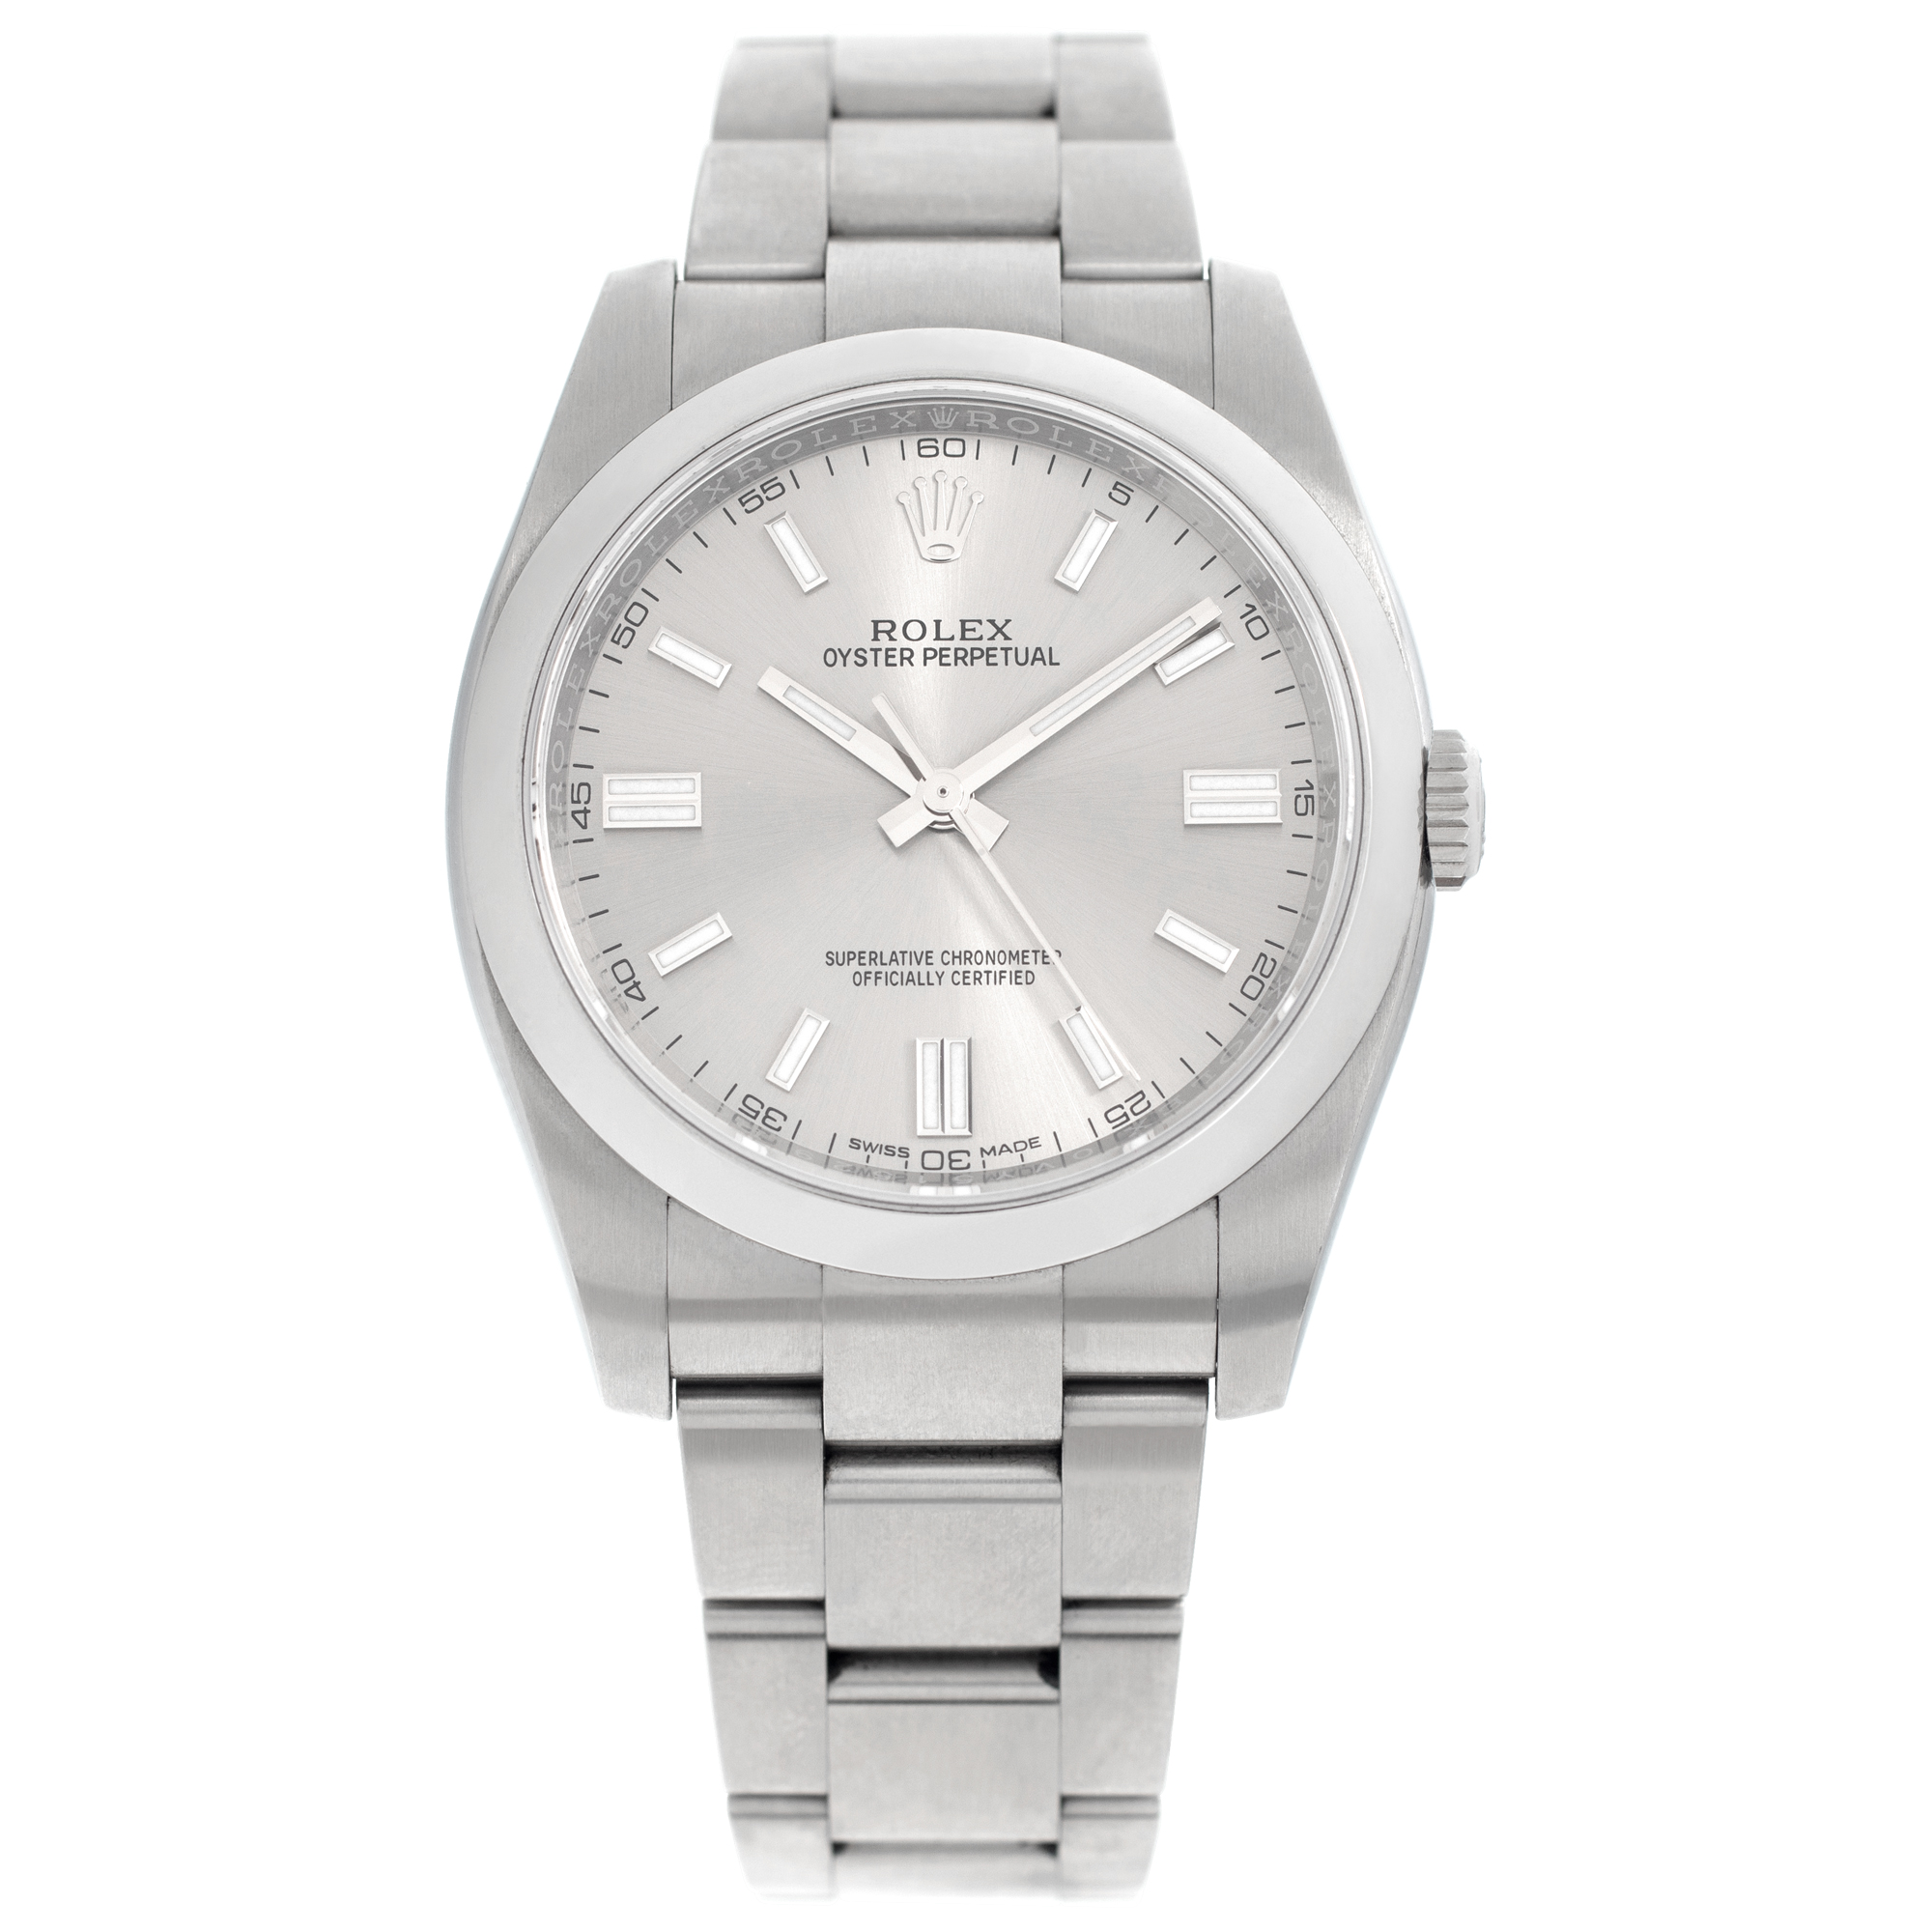 Rolex Oyster Perpetual 36mm 116000 image 1